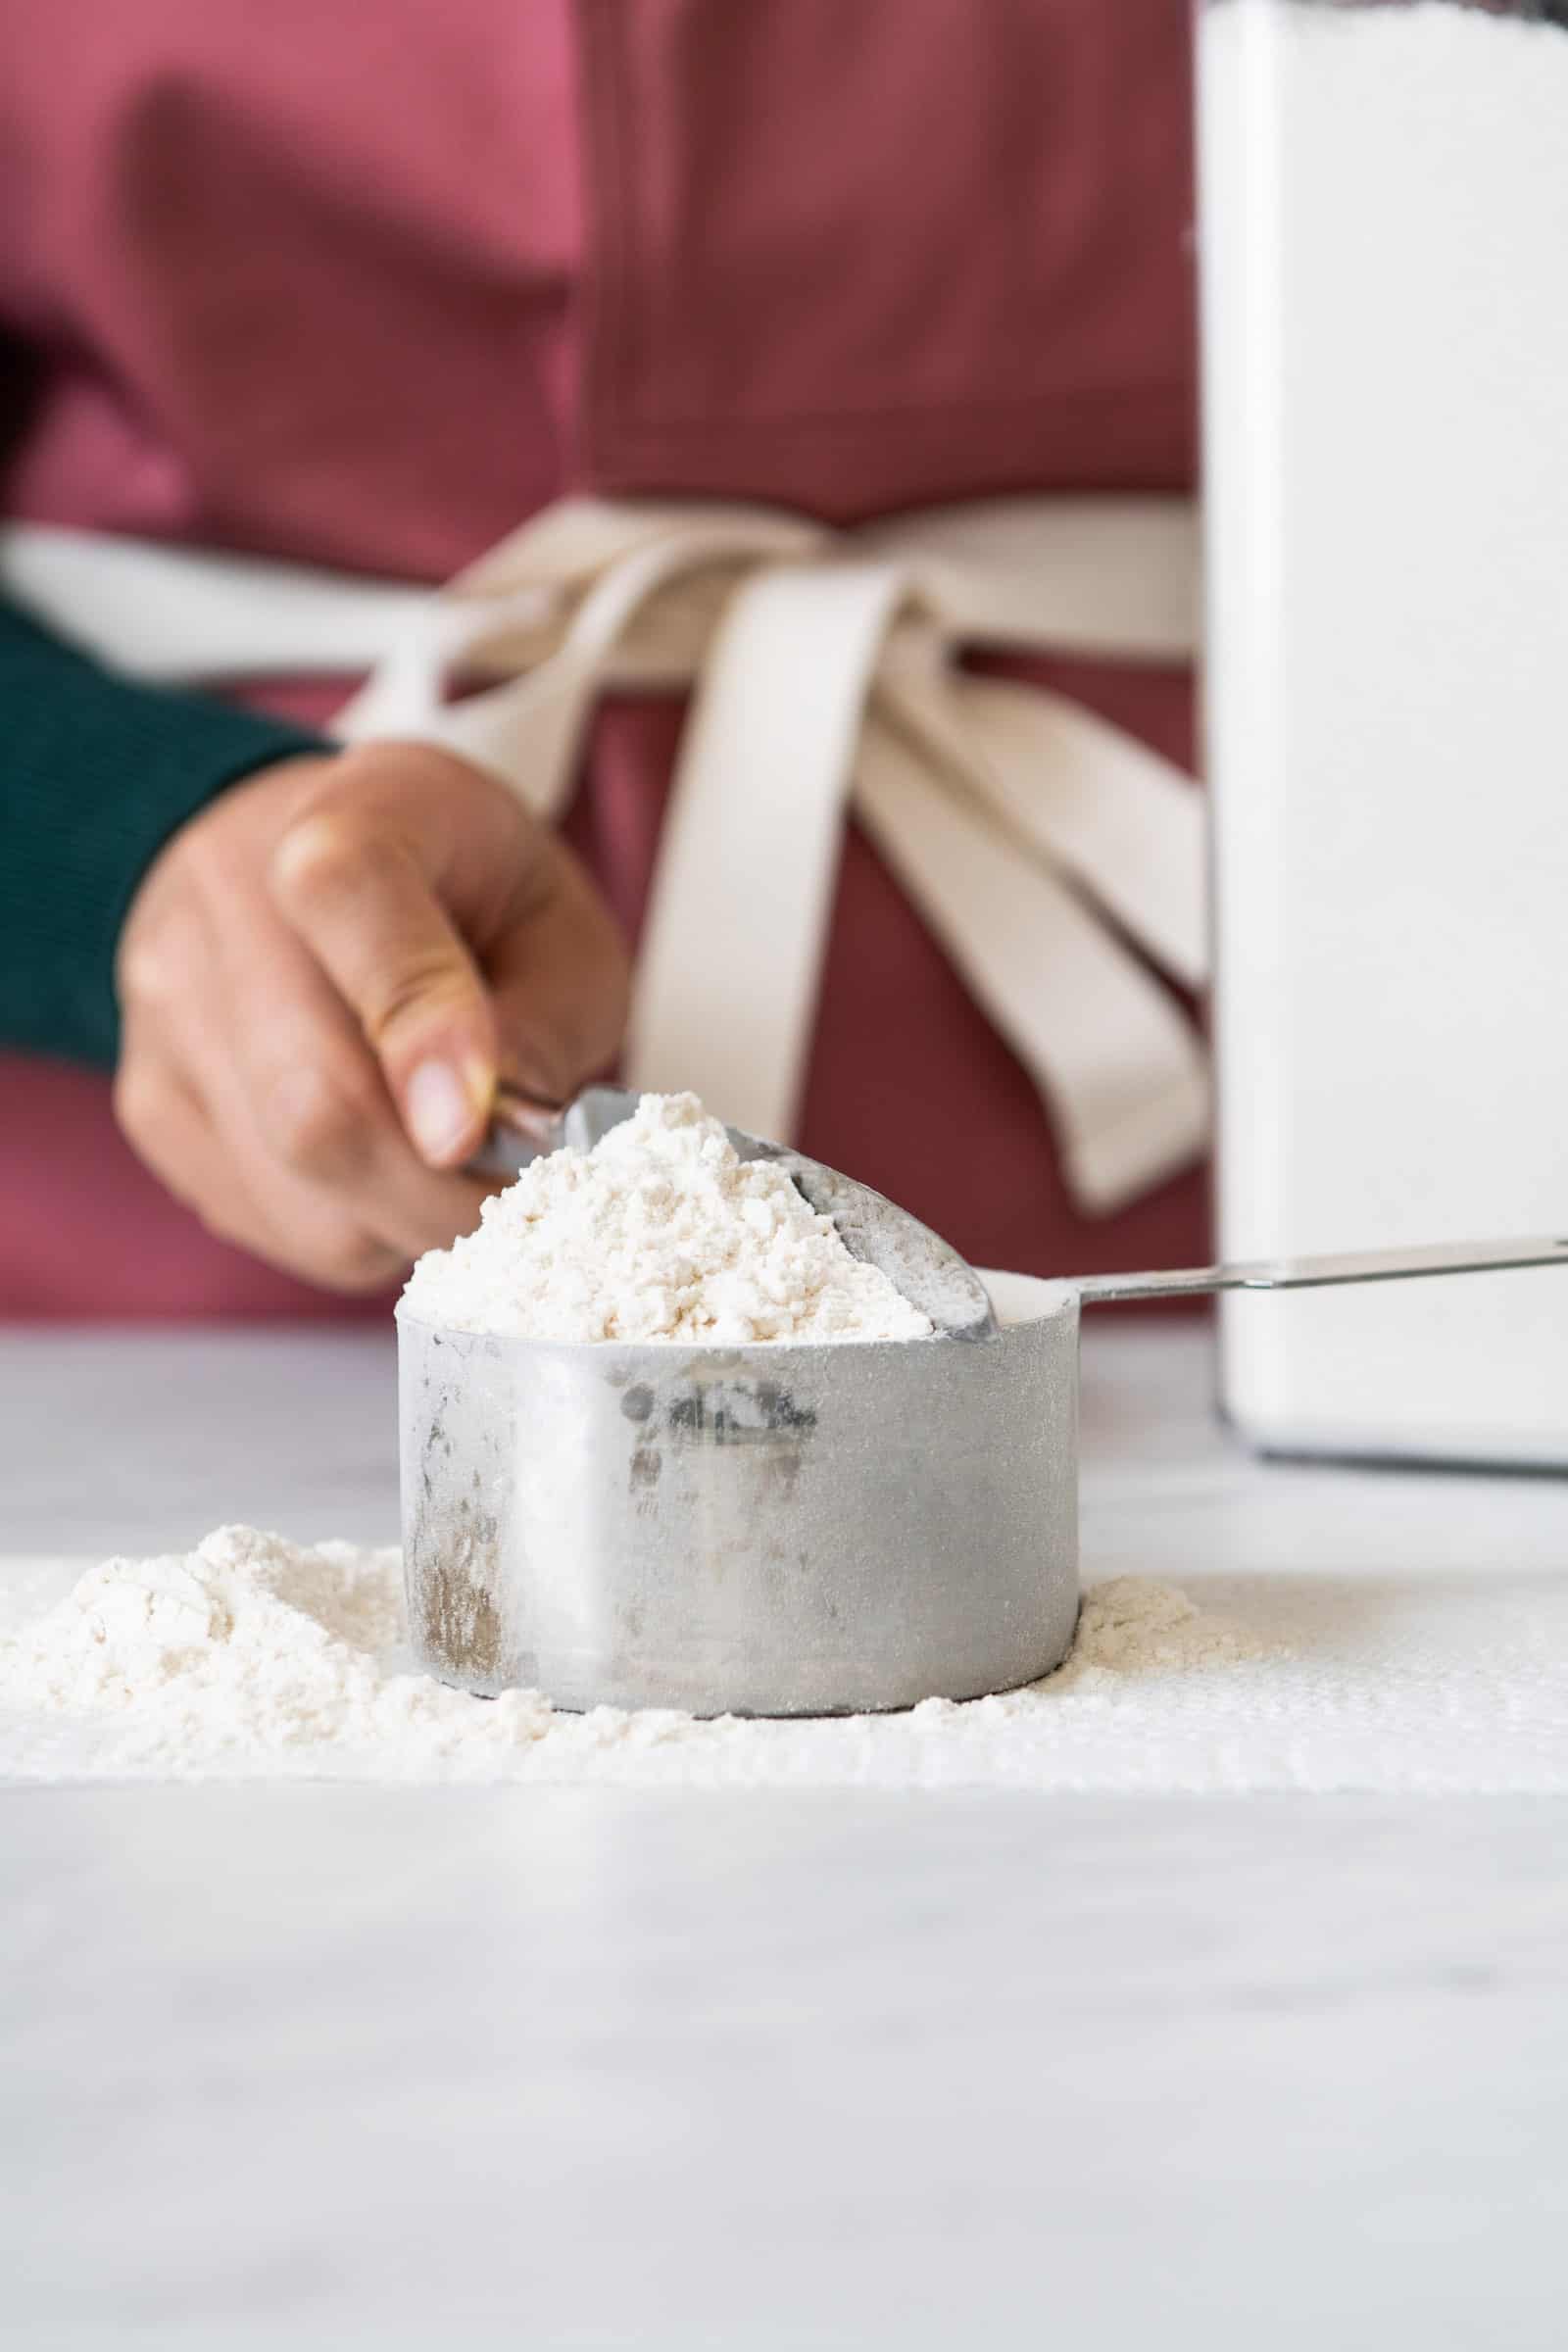 How to Measure Flour - leveling off flour at the top